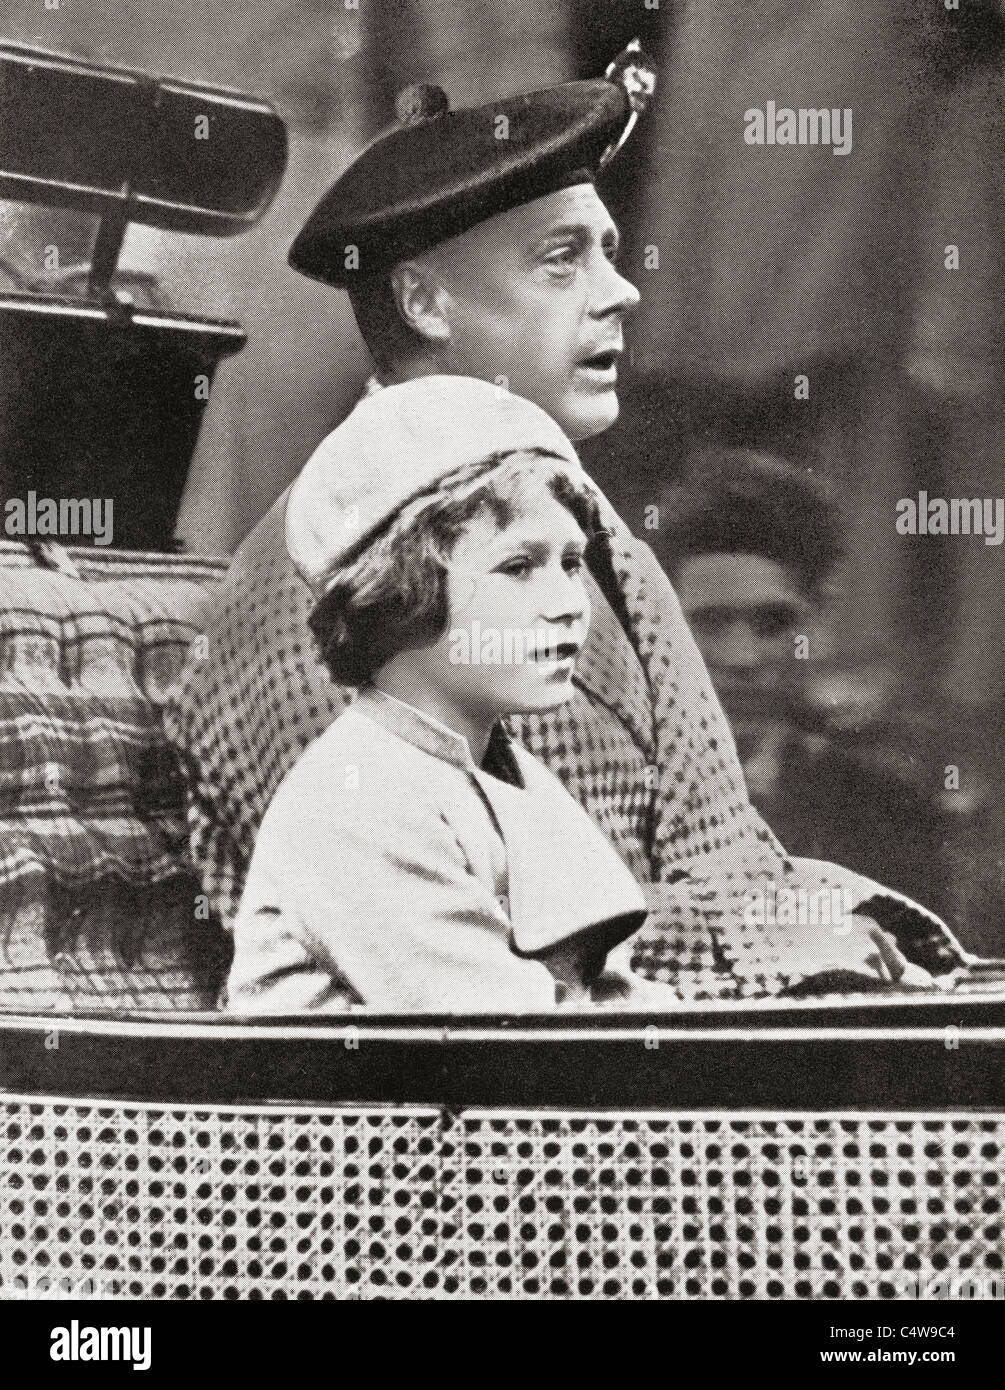 The Prince of Wales, later King Edward VIII, with Princess Elizabeth, later Queen Elizabeth II. Stock Photo